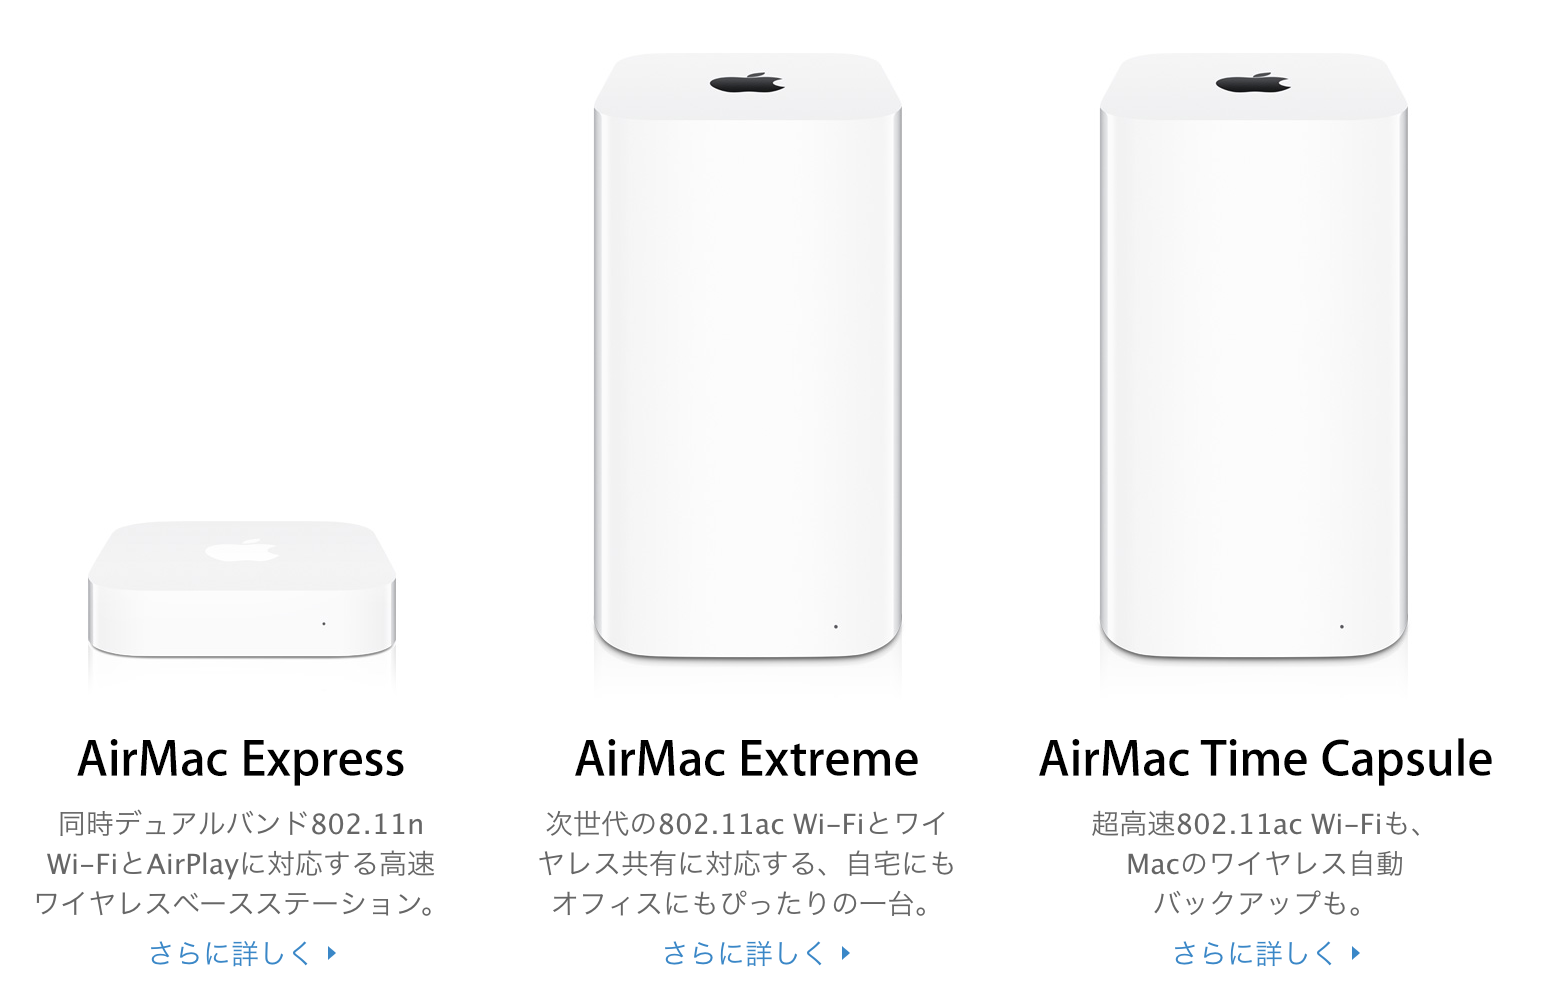 AirMac extreme 802.11ac A1521